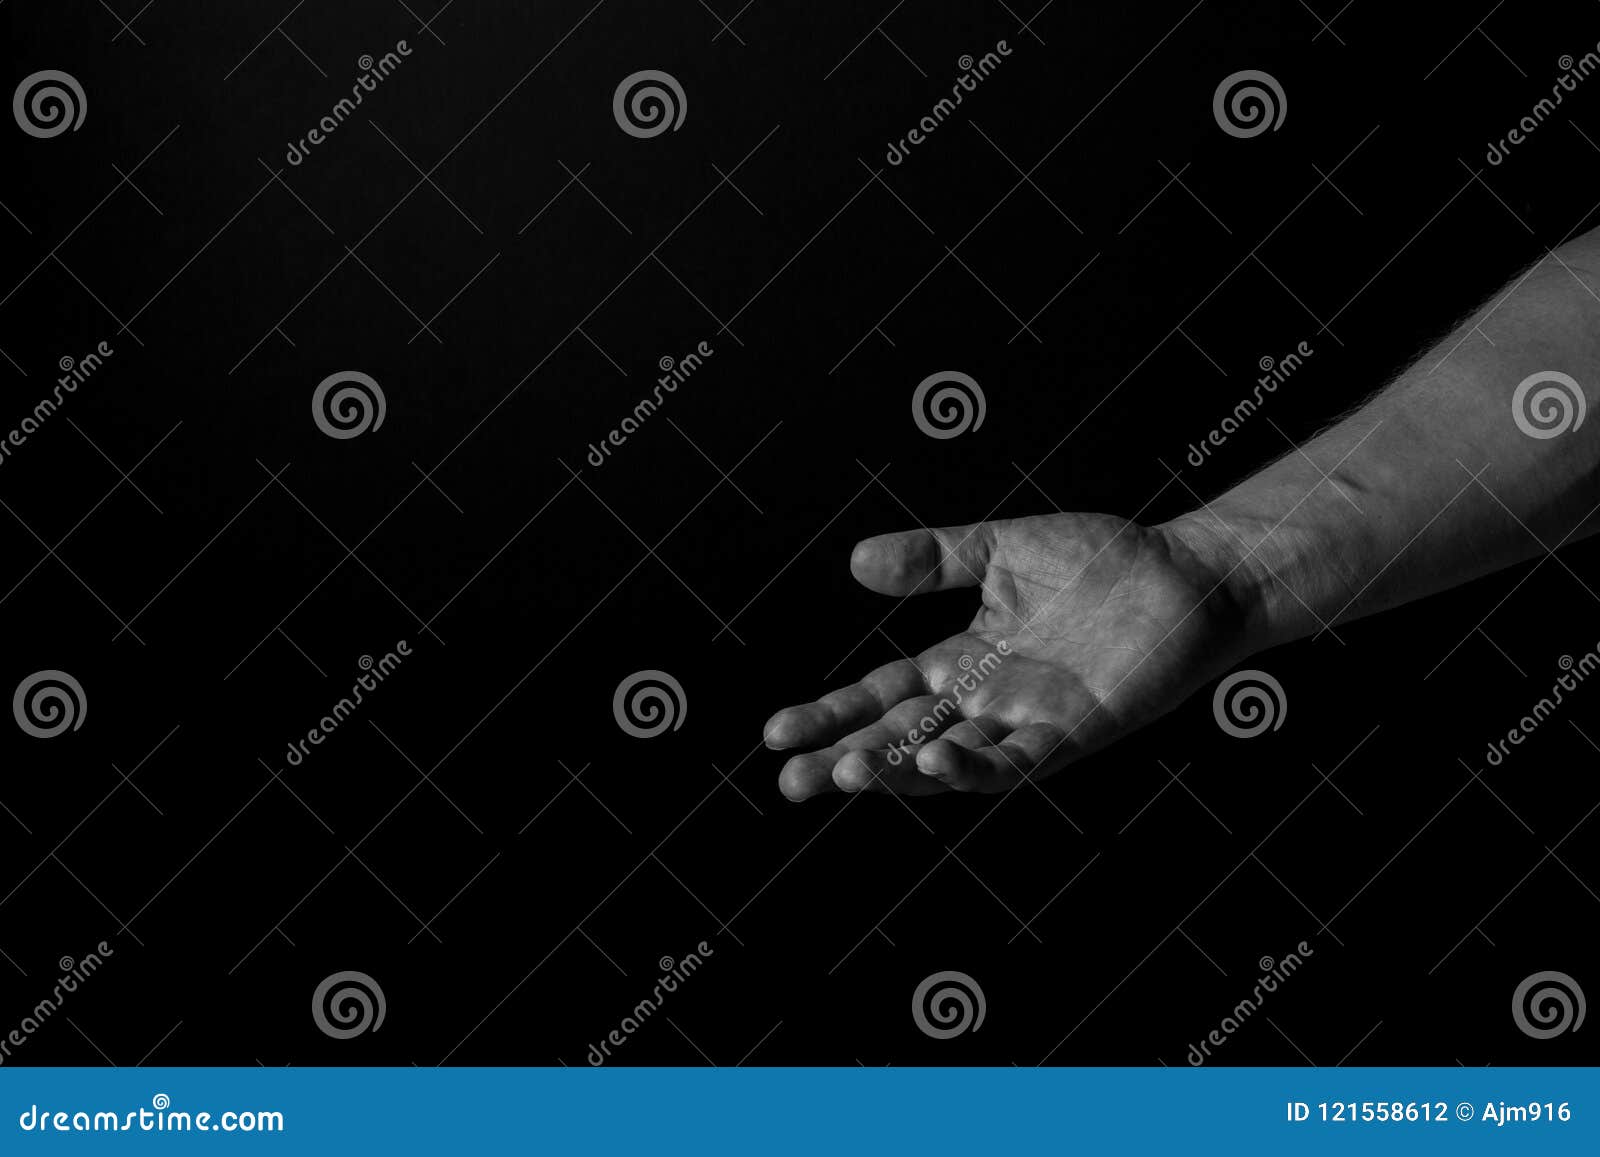 hand of a man palm up reaching, on black background, giving a helping hand. give me your hand concept.